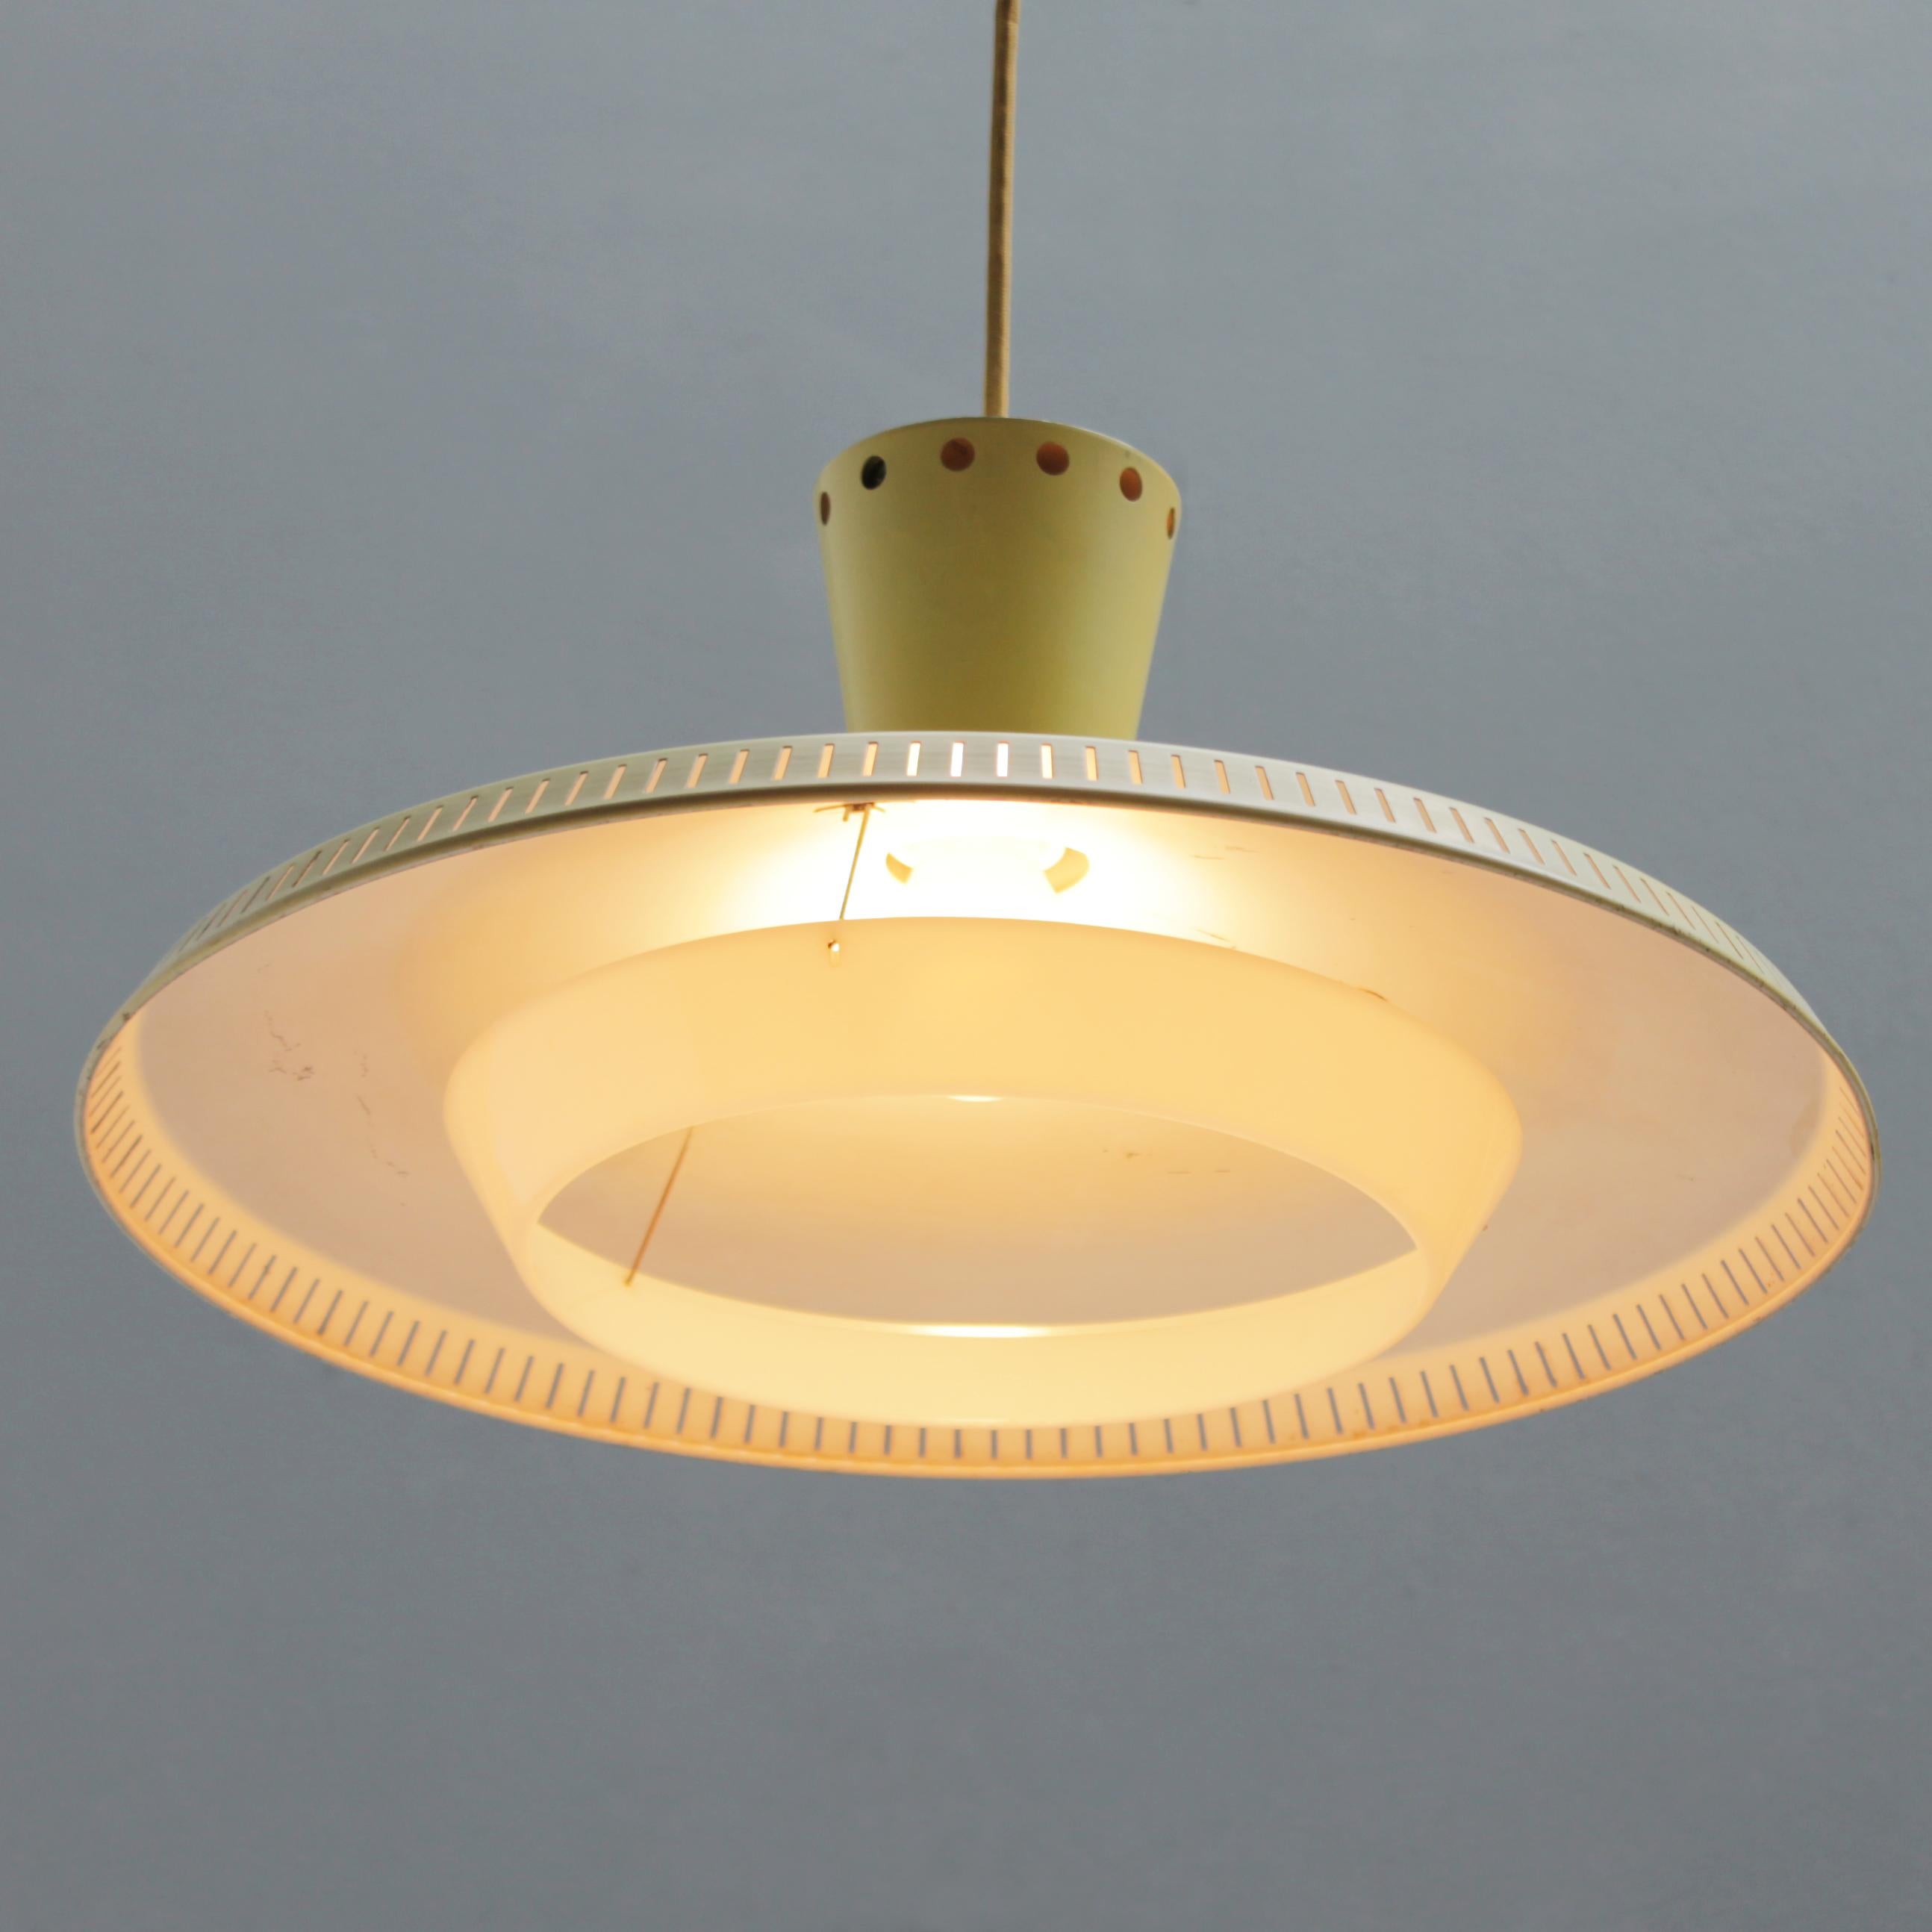 Mid-20th Century Yellow Pendant by Louis Kalff for Philips, Dutch 1950’s